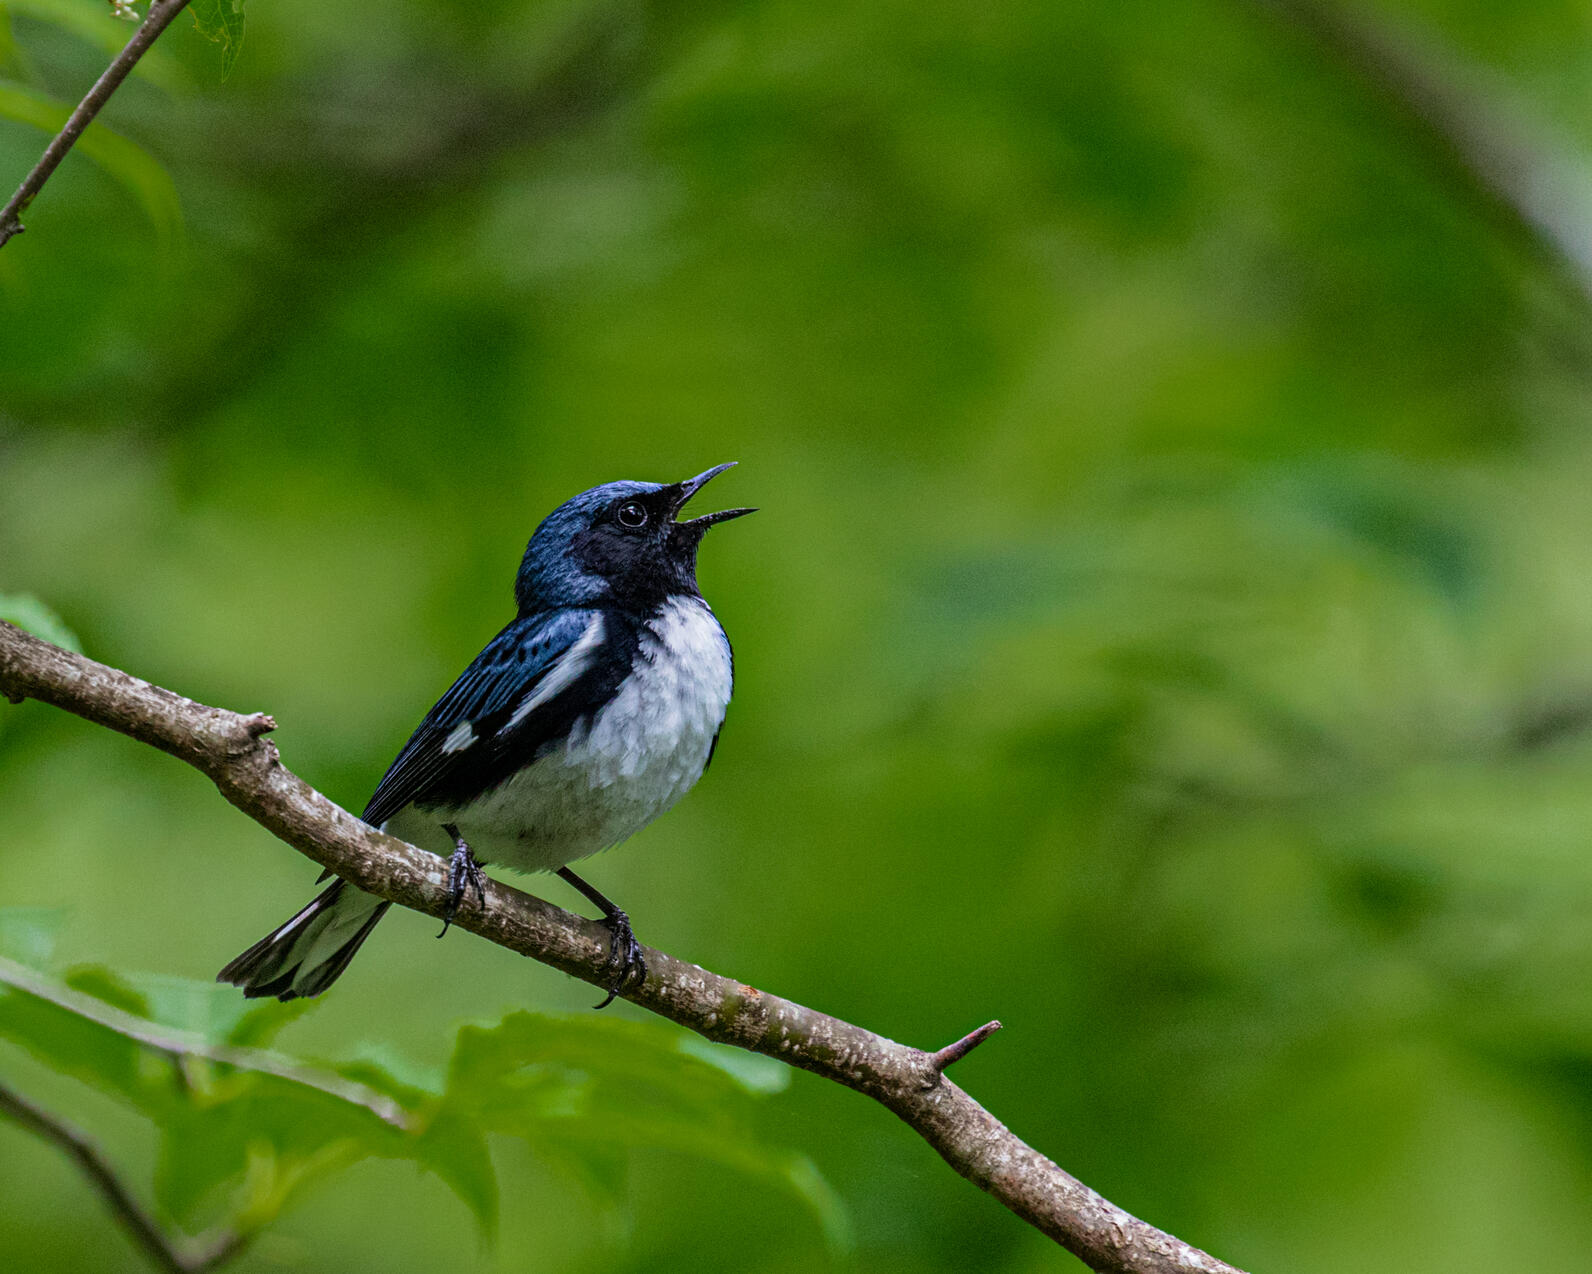 A male Black-throated Blue Warbler perches on a branch amidst greenery, beak open as it calls.